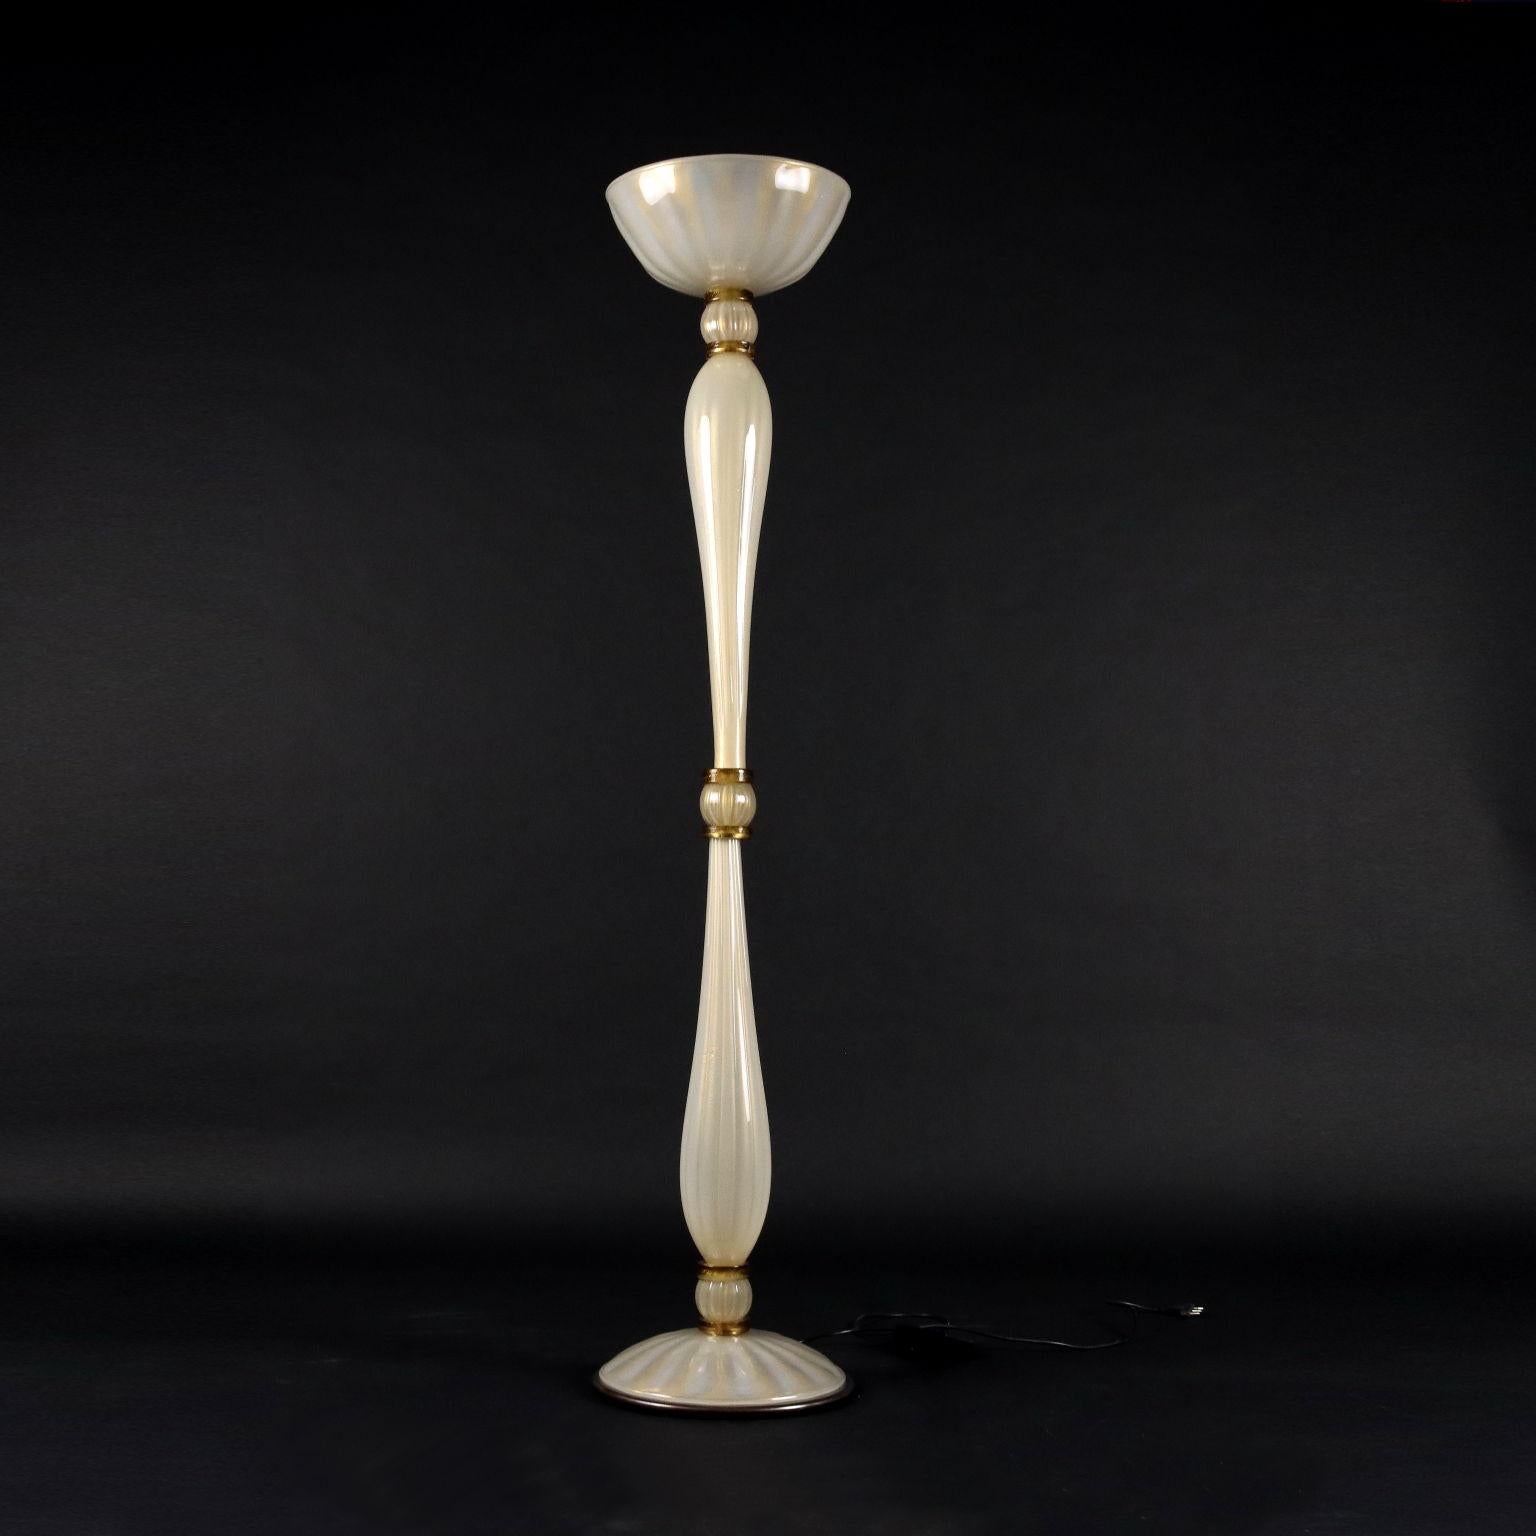 Floor lamp in the style of glass and brass. In good condition.